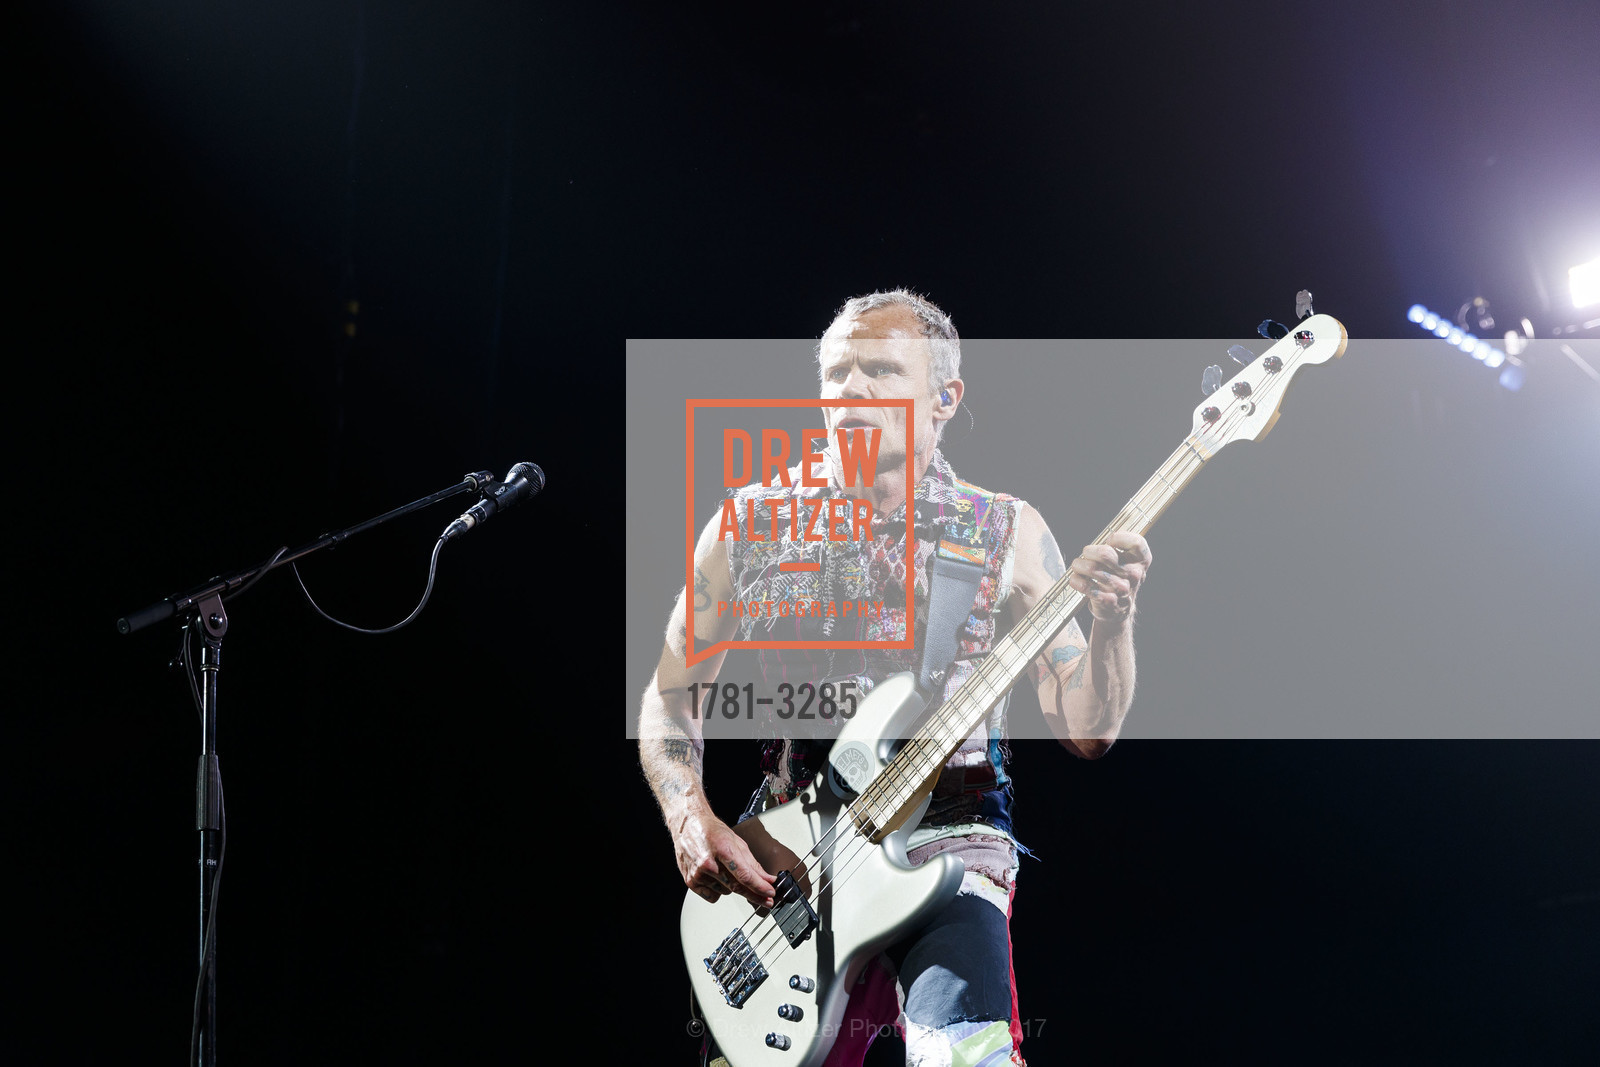 The Red Hot Chili Peppers, Photo #1781-3285